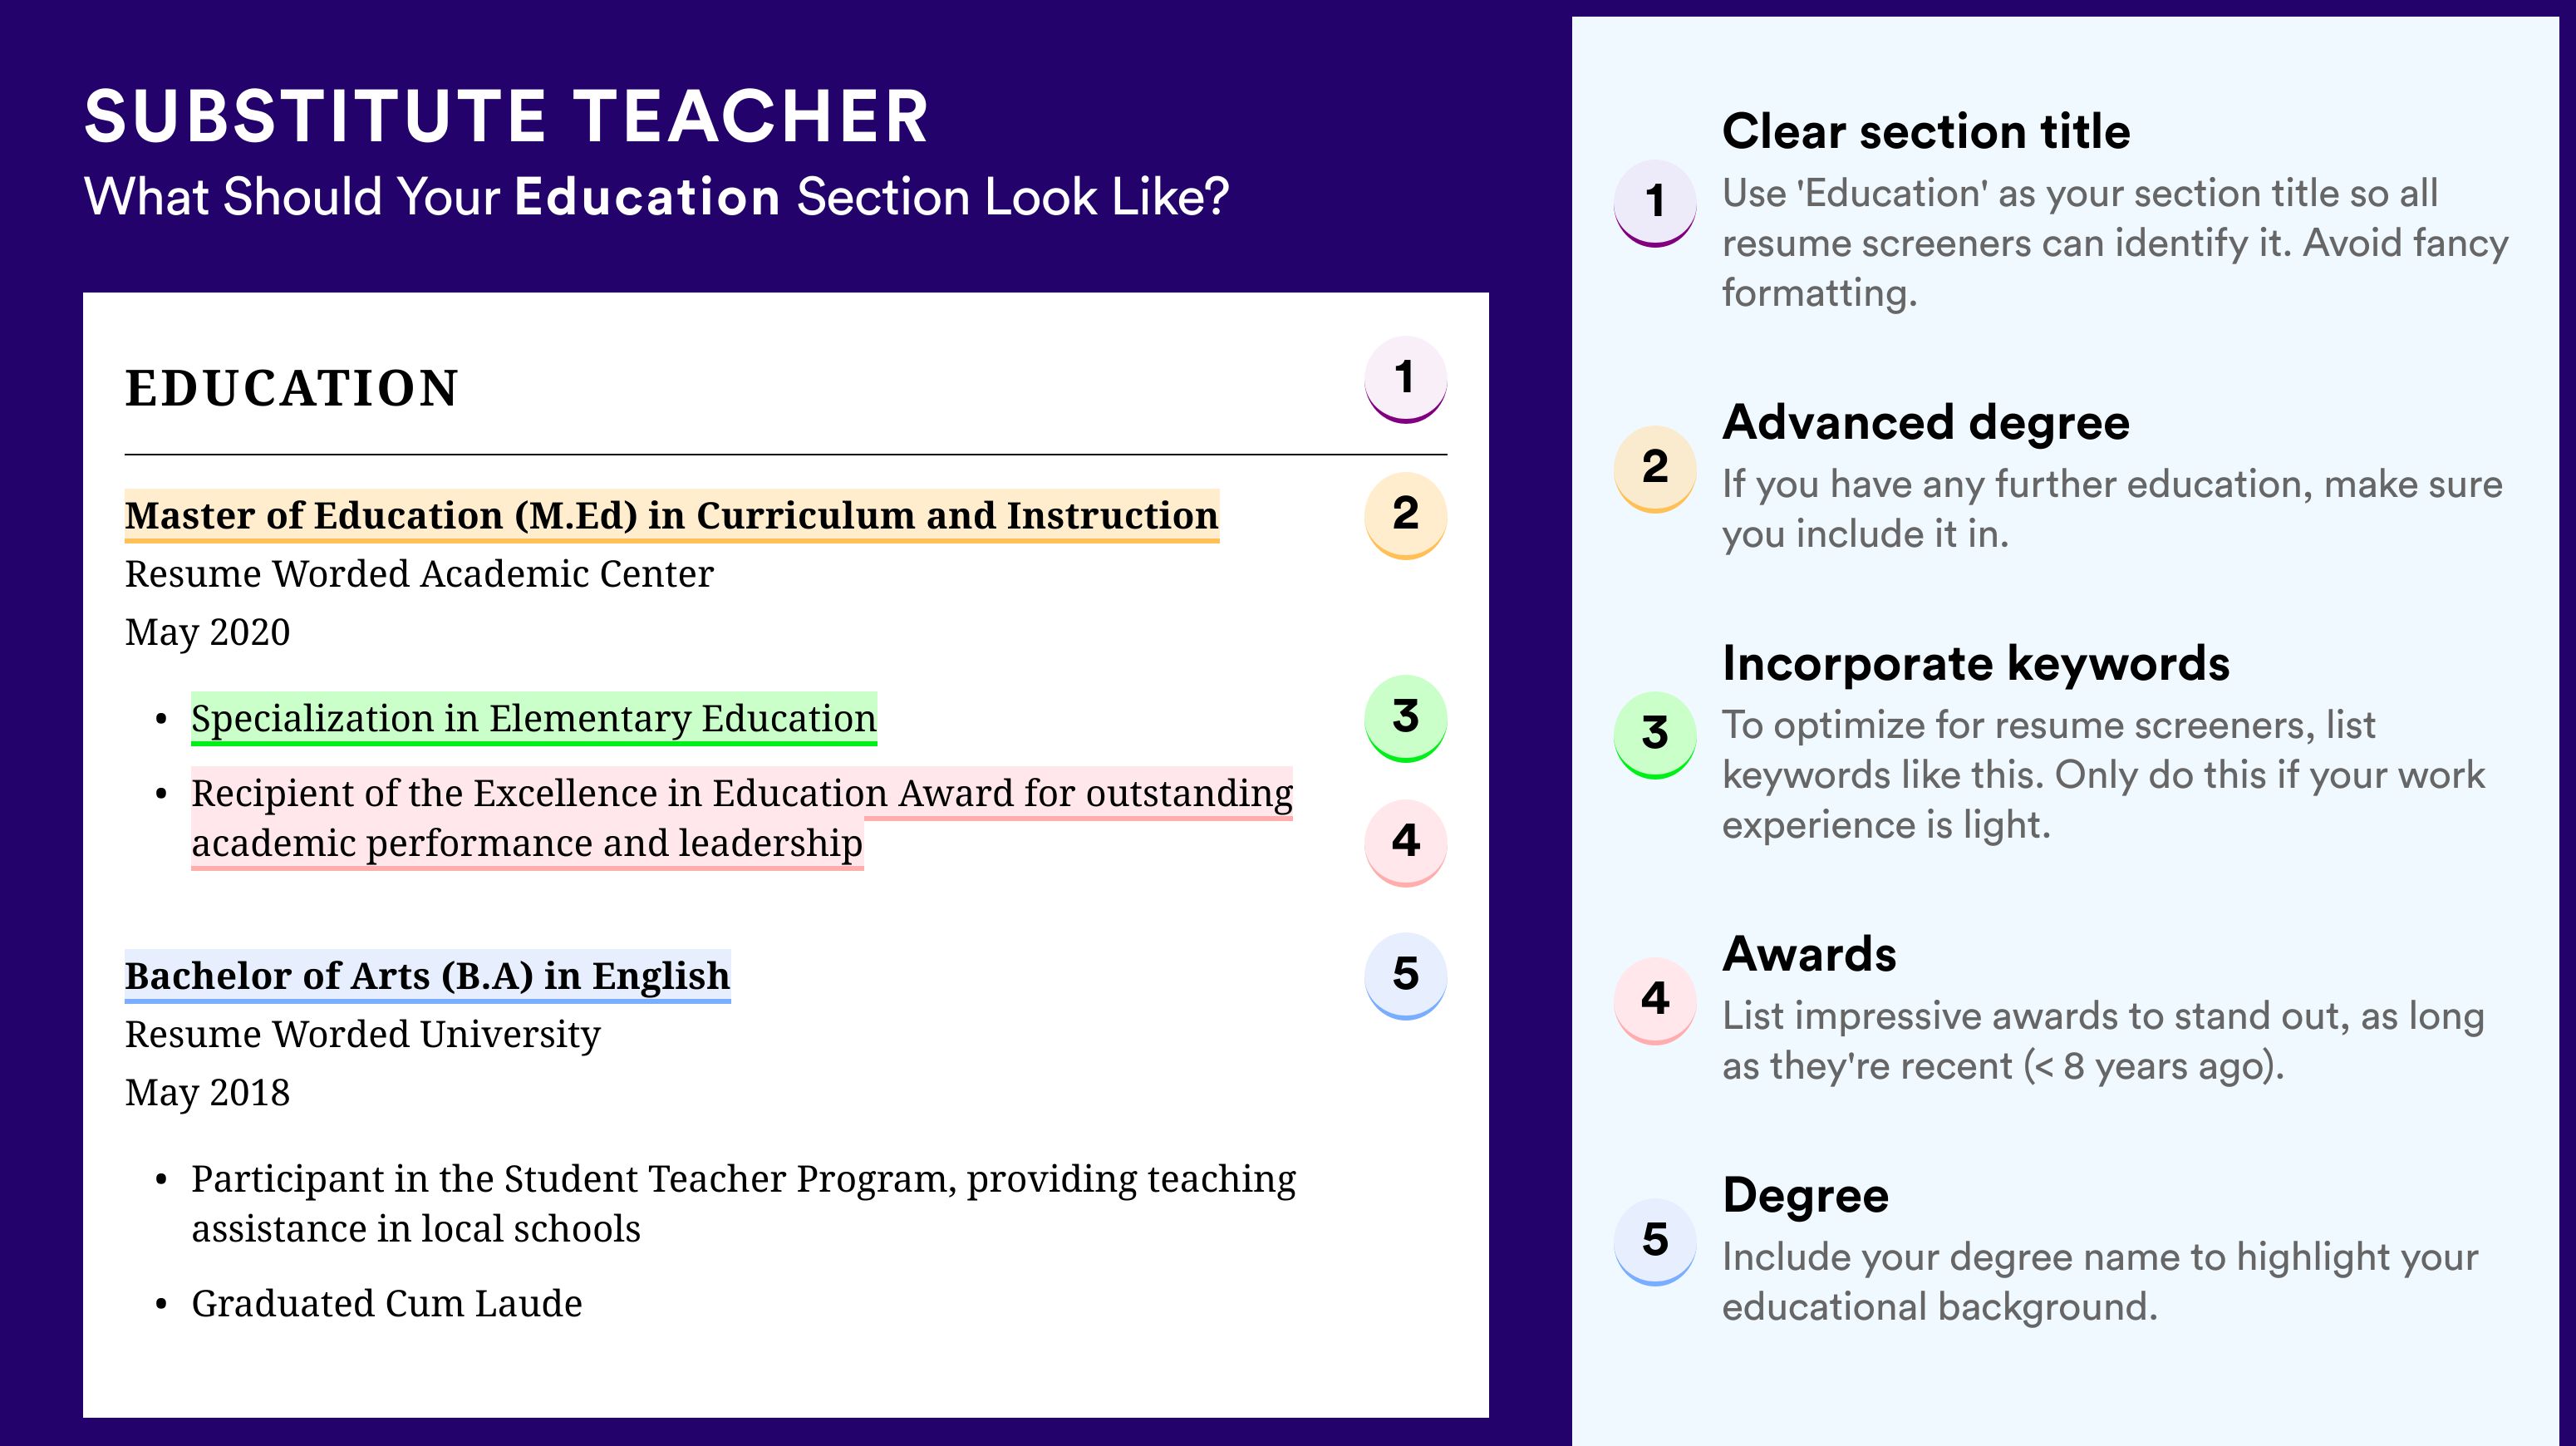 How To Write An Education Section - Substitute Teacher Roles